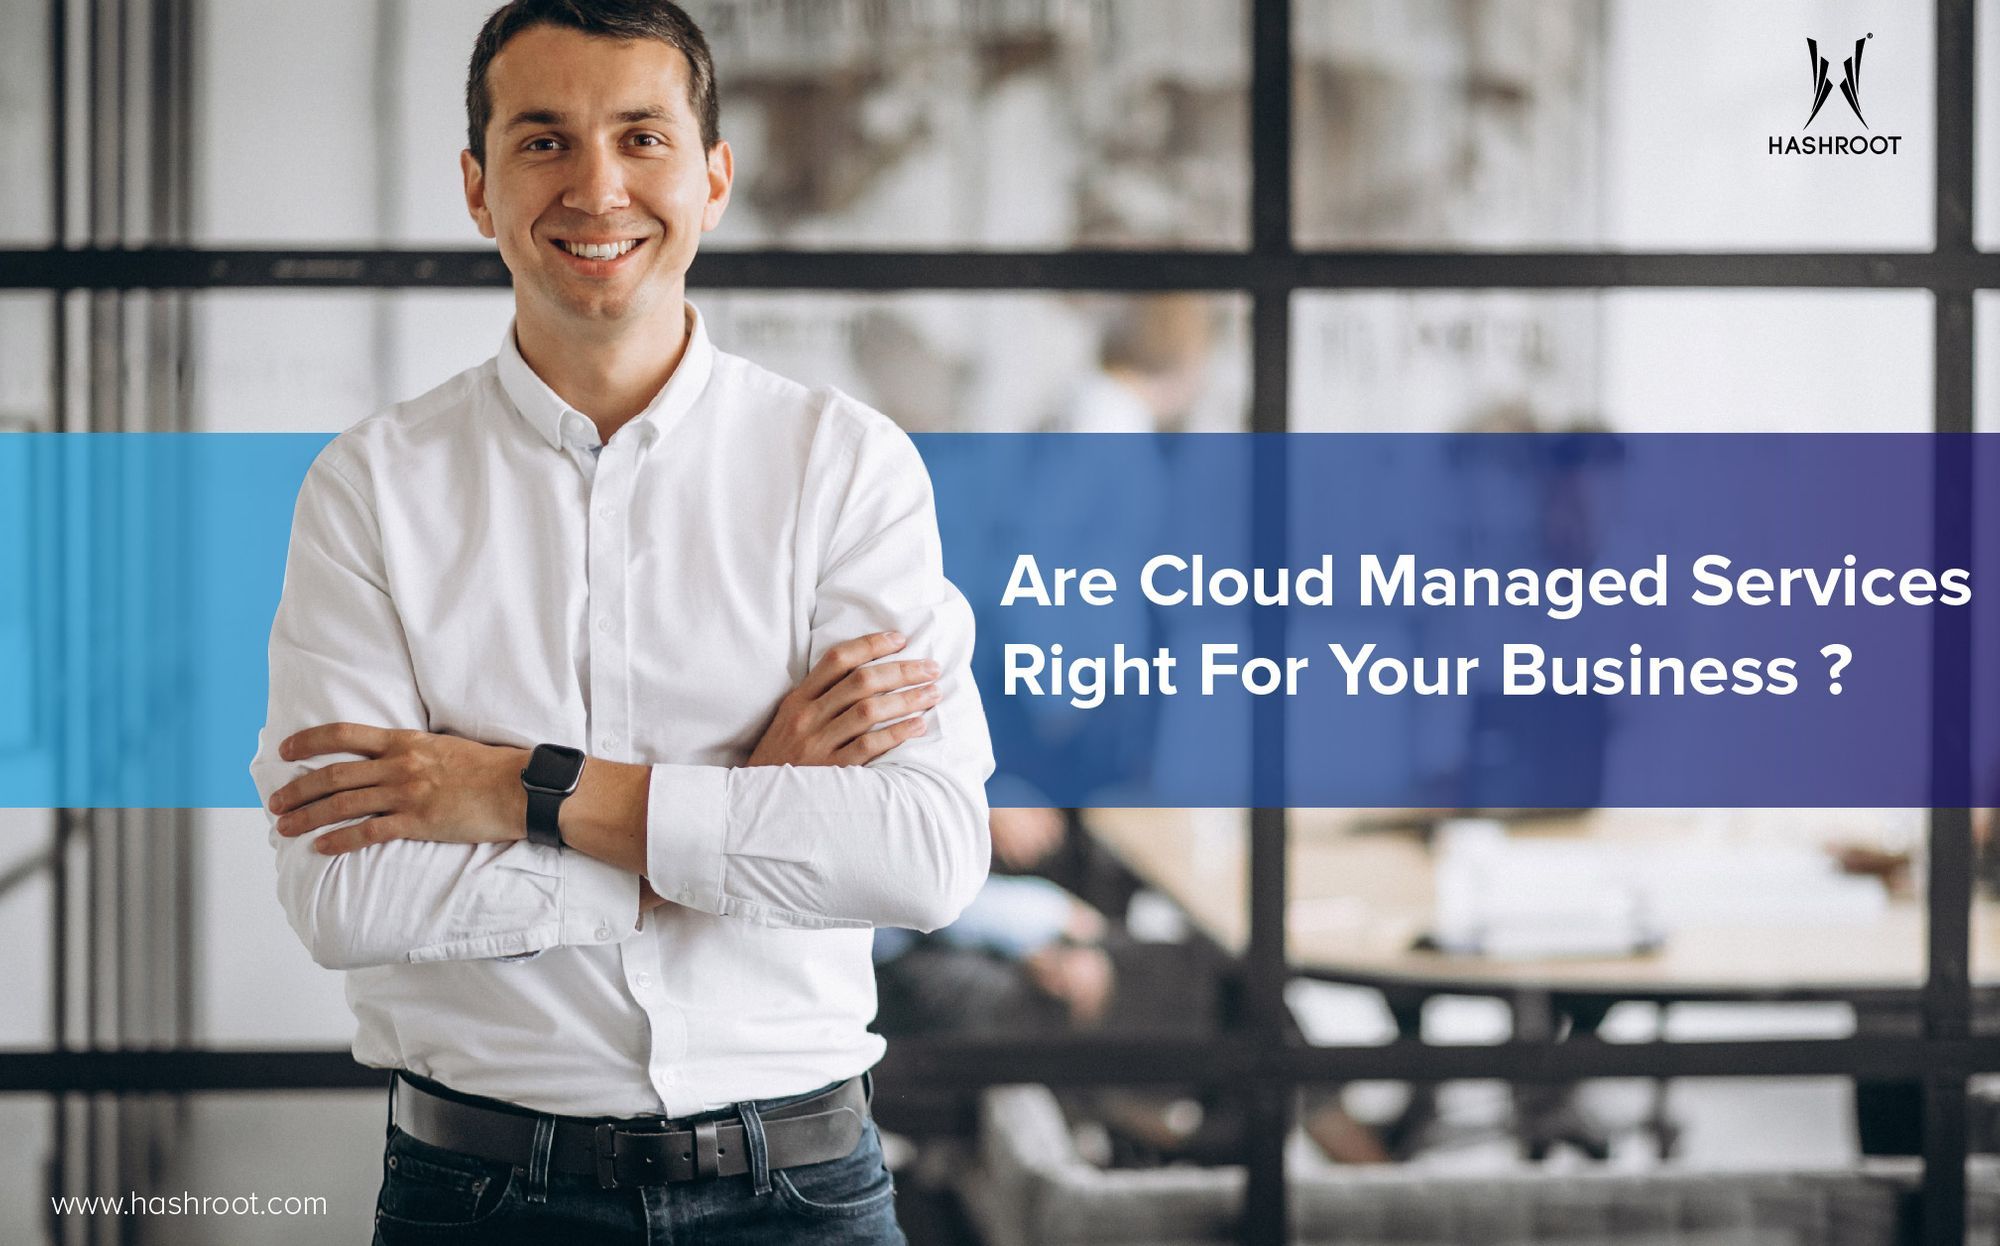 Are Cloud Managed Services Right For Your Business?